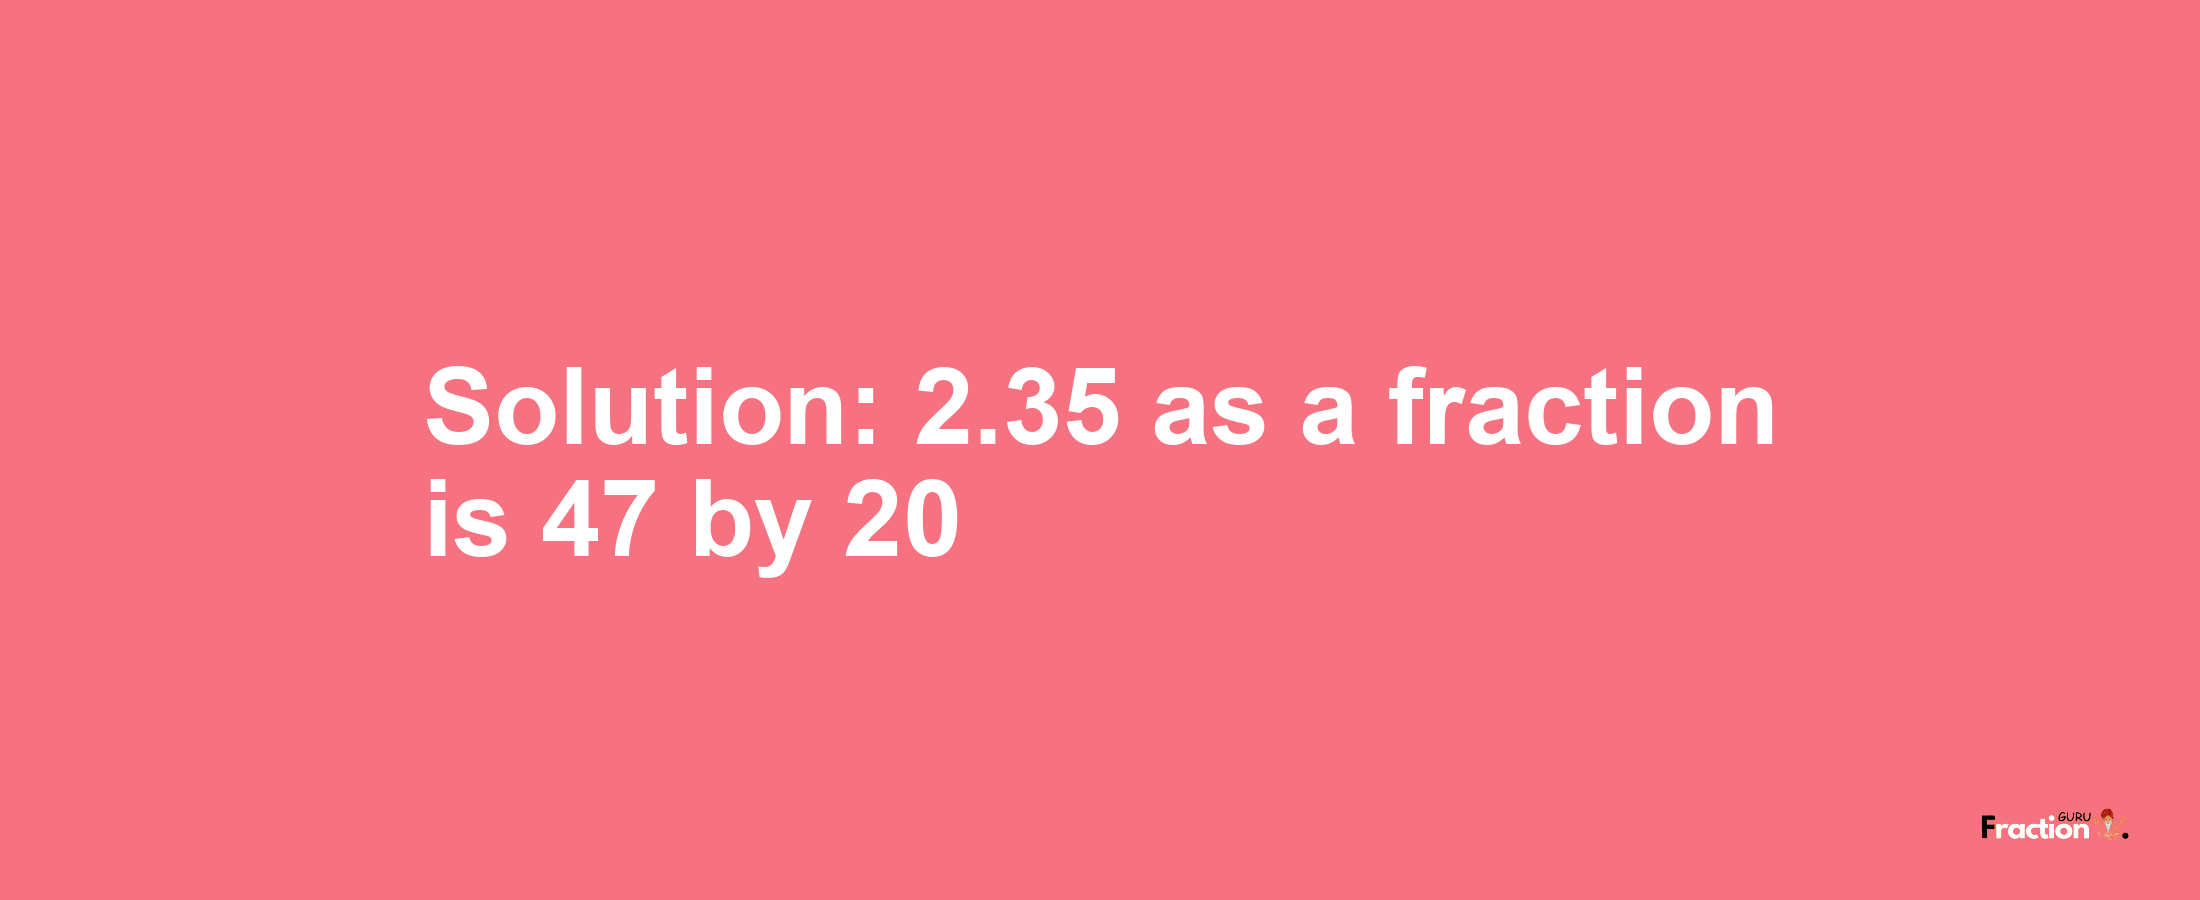 Solution:2.35 as a fraction is 47/20